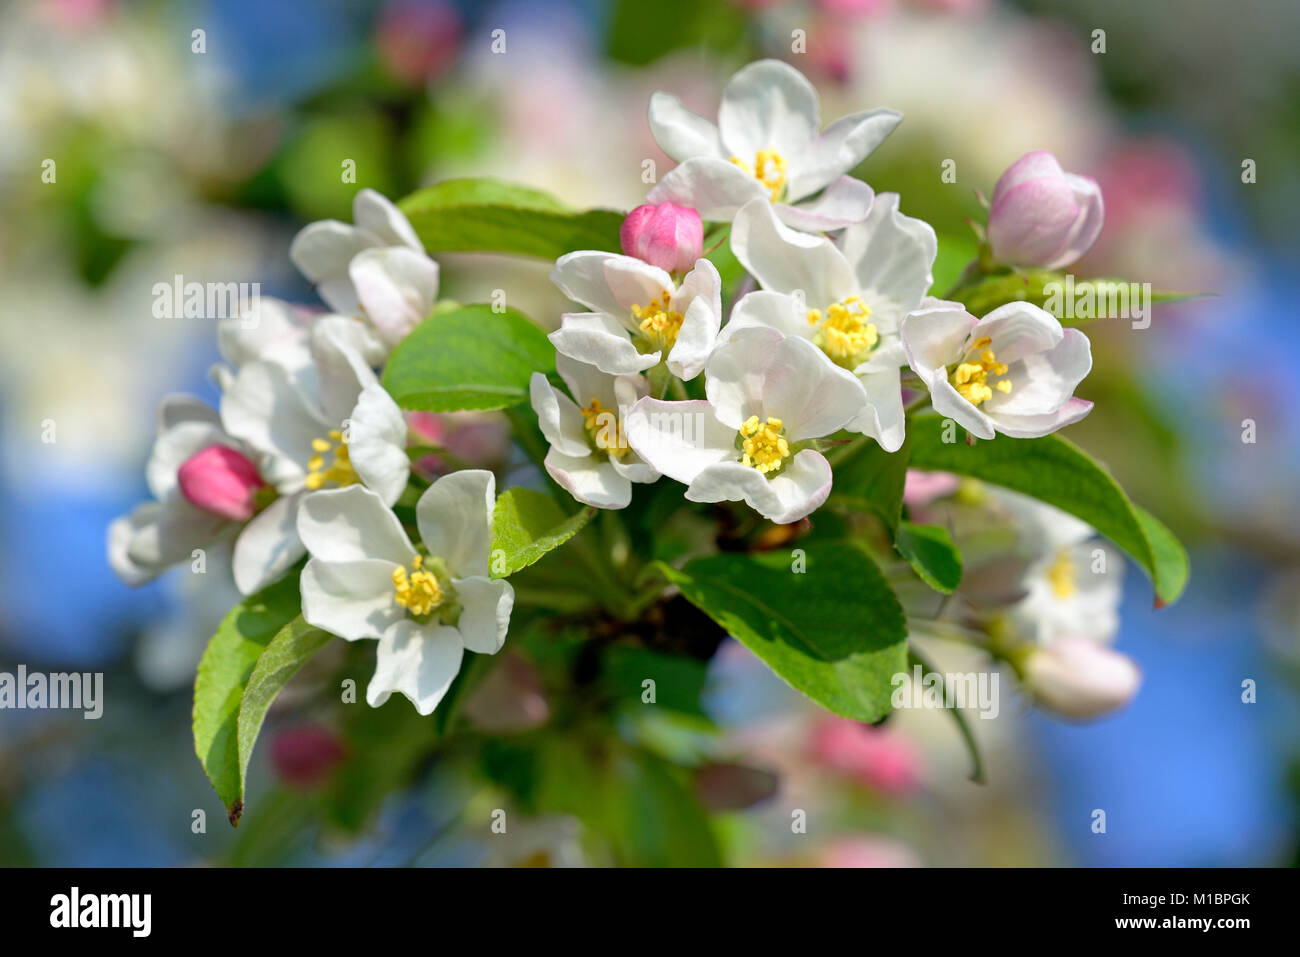 Apple tree (Malus), twig with flowers, Germany Stock Photo